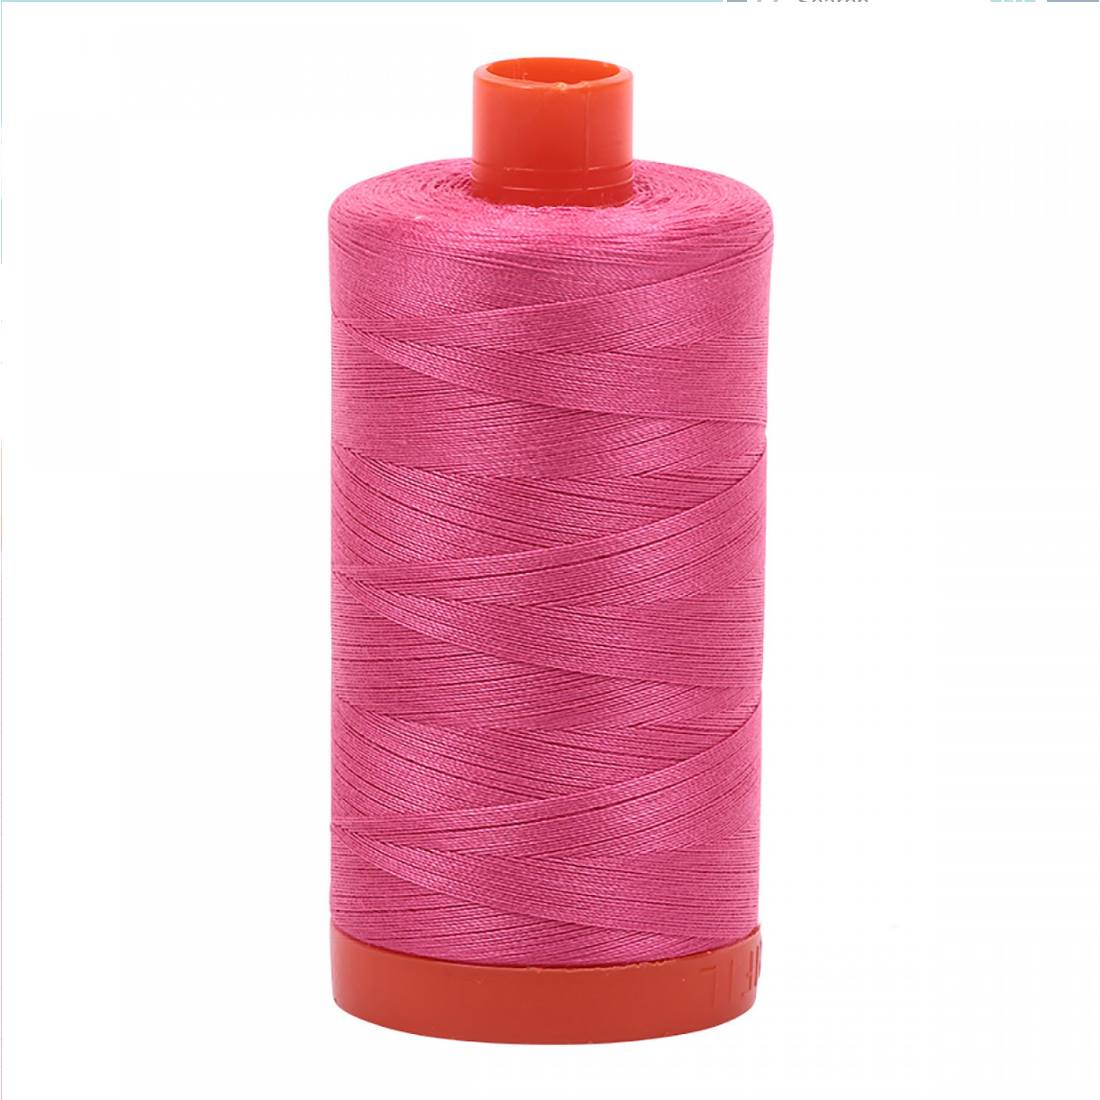 Aurifil ~ Mako Cotton Embroidery/Sewing Thread 50wt 1422yds Blossom Pink ~ 2530